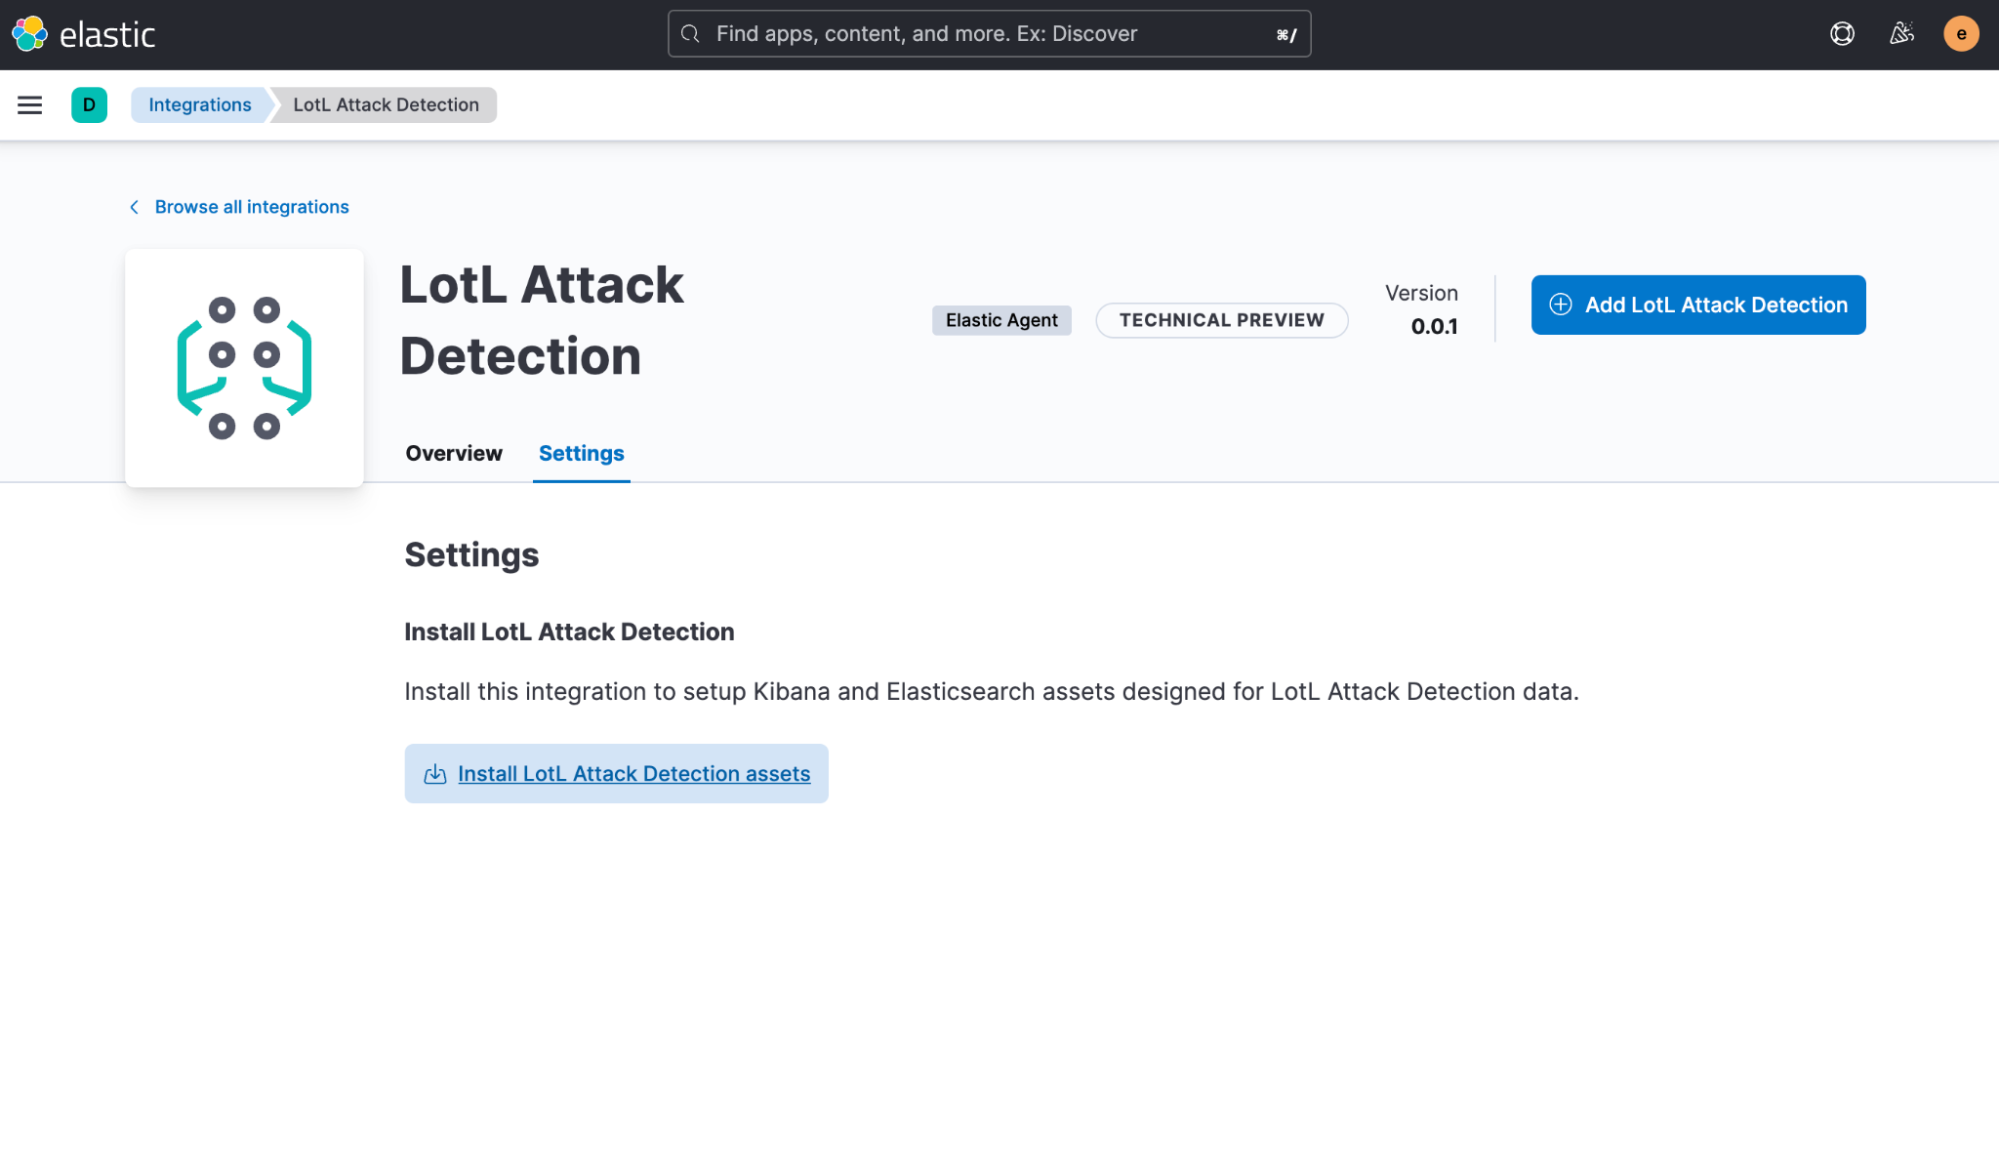 To install the assets, click the `Install LotL Attack Detection assets` button under the `Settings` tab.